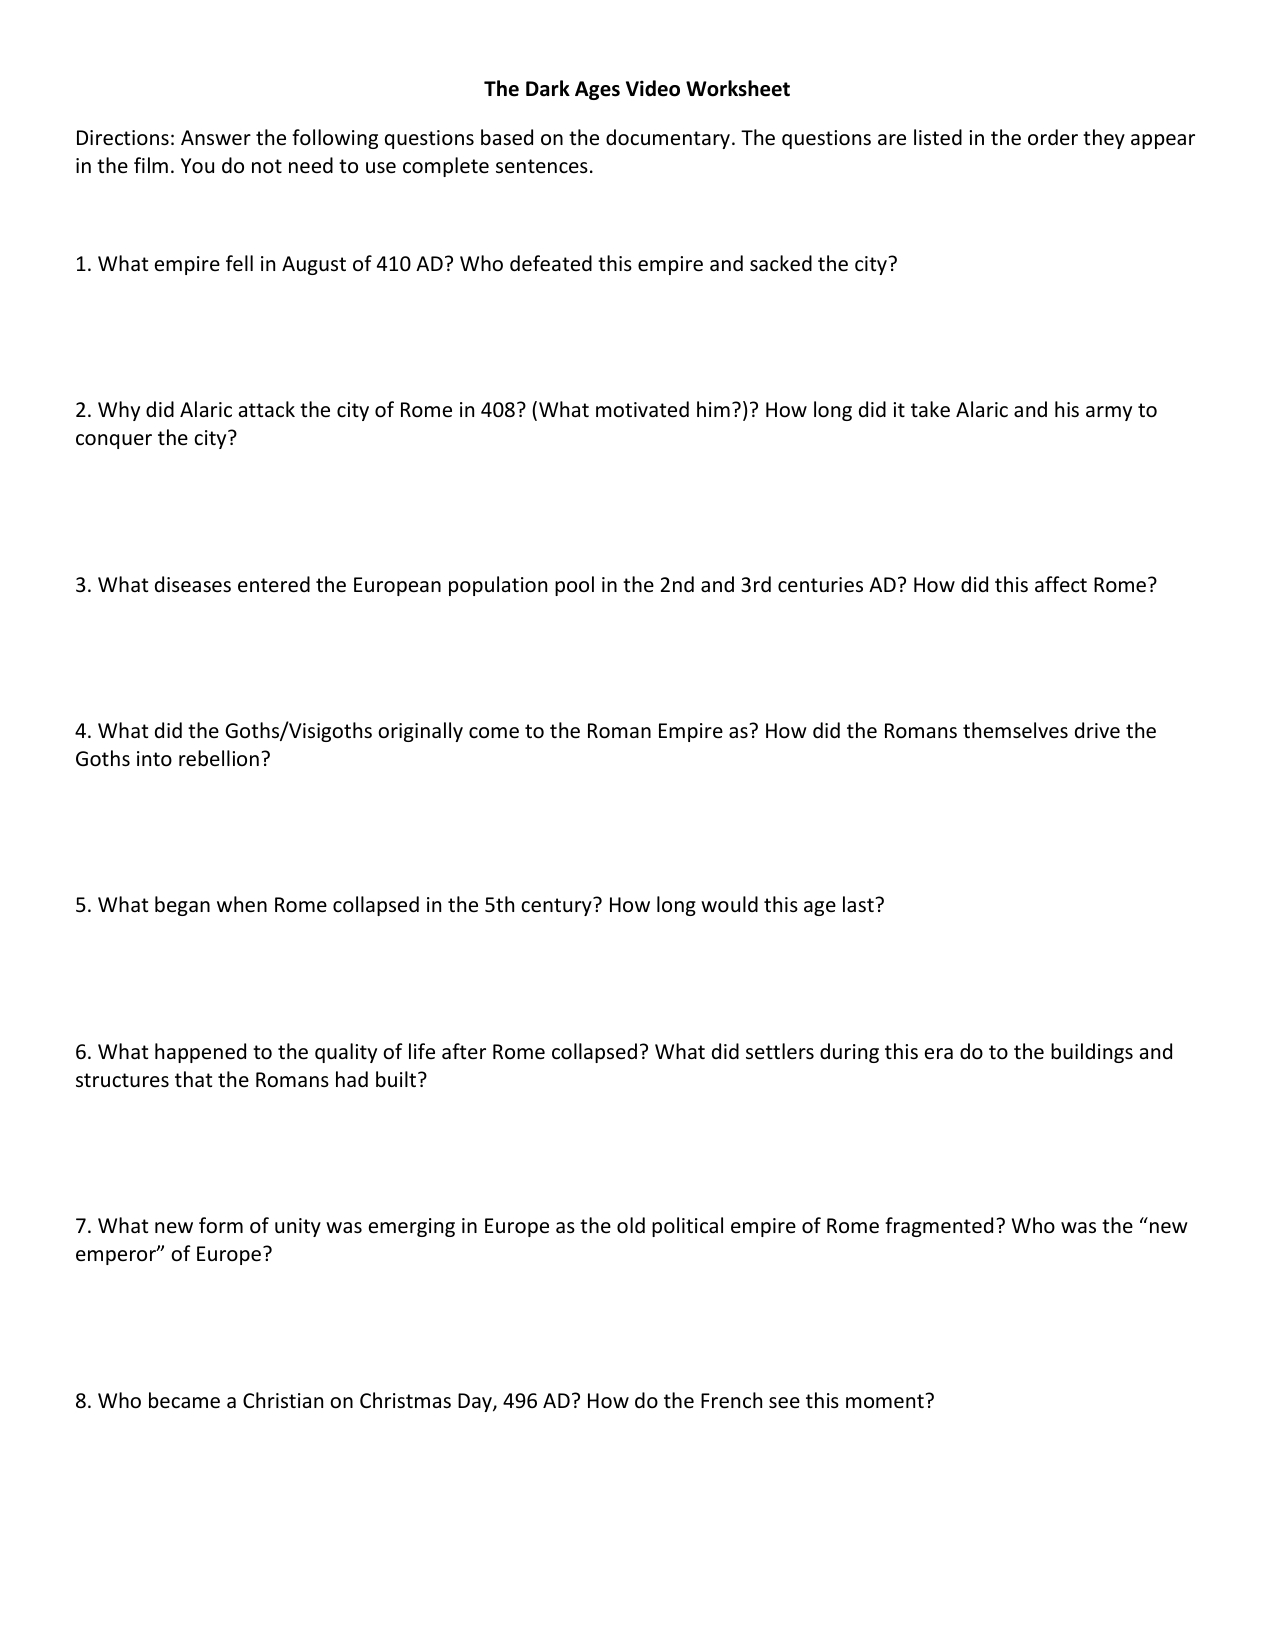 The Dark Ages Video Worksheet Directions Answer The Following Regarding The Dark Ages Video Worksheet